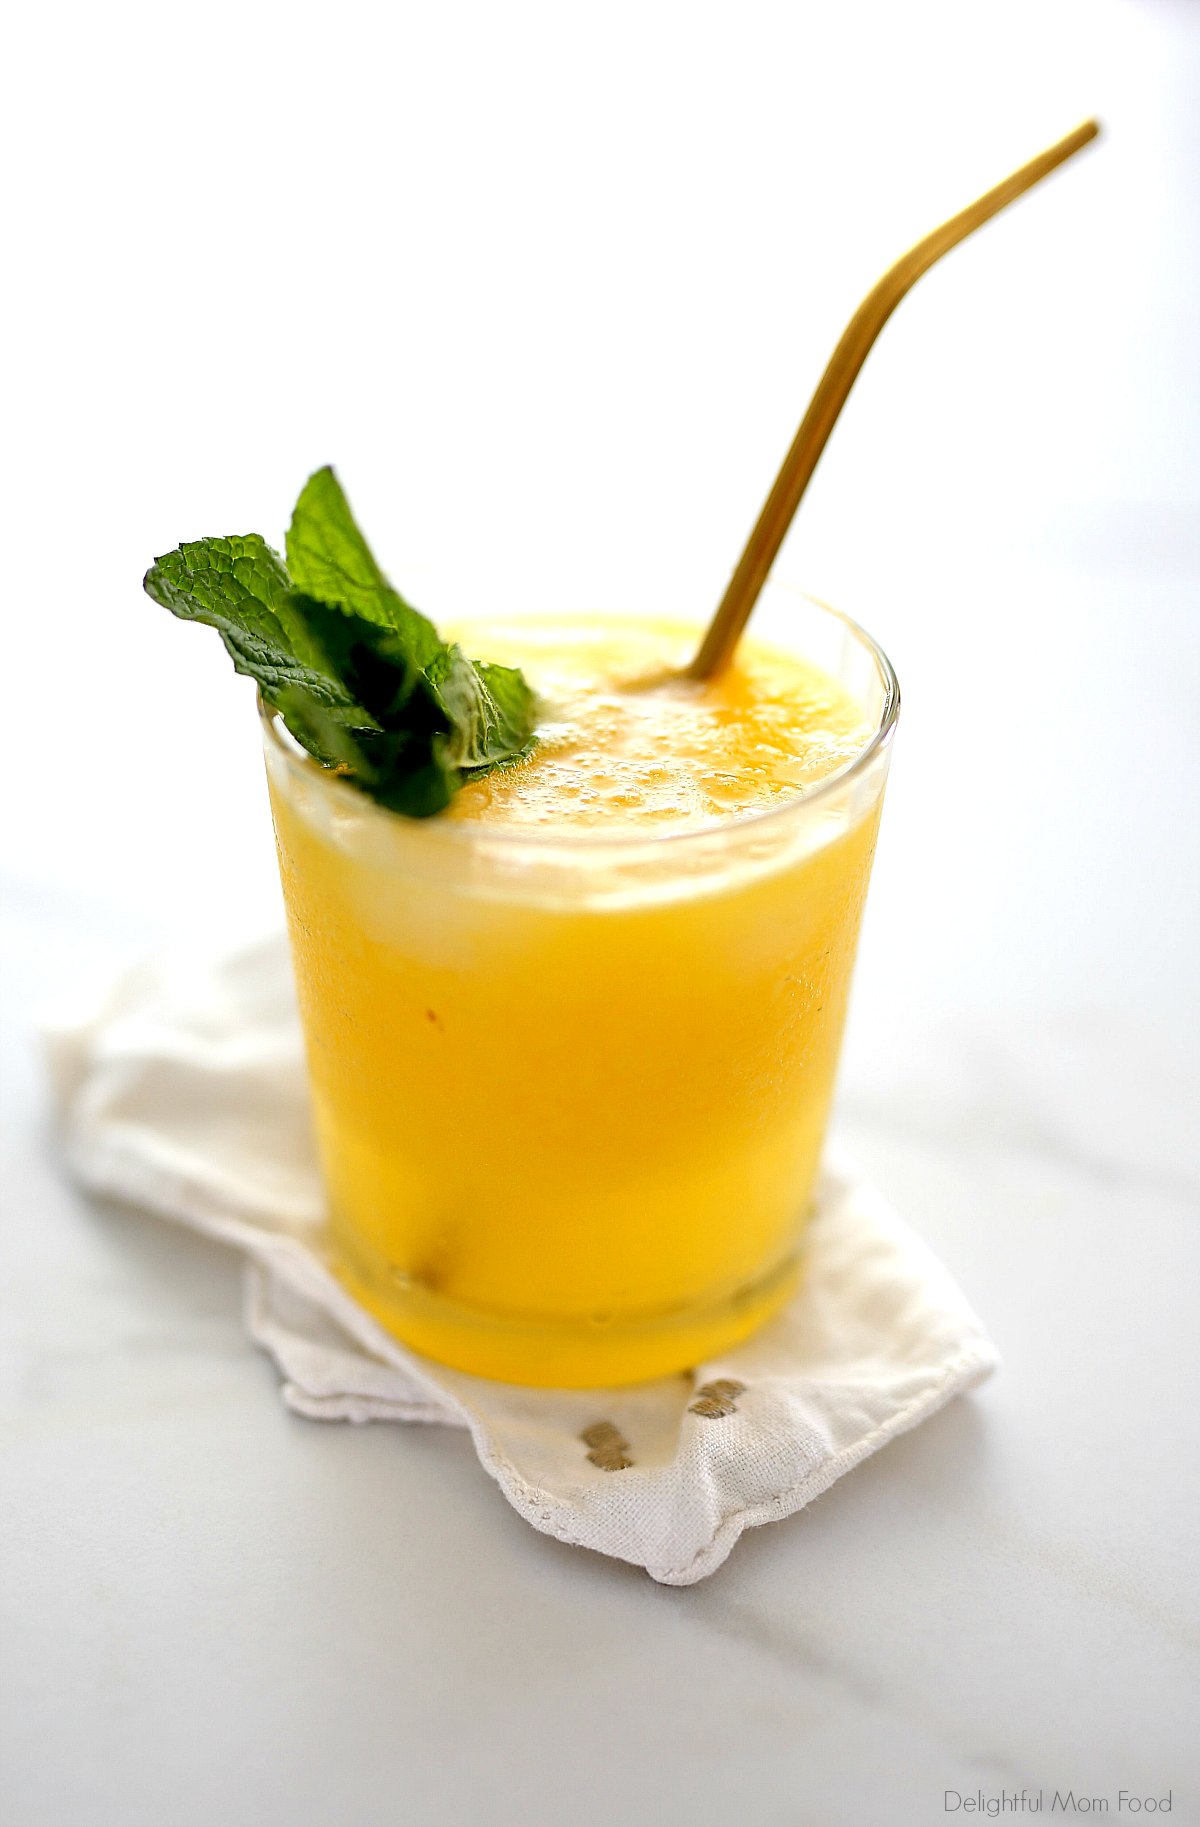 Mango cocktail recipe sweetened naturally with mango puree and fresh citrus juice mixed with vodka and sparkling water. Enjoy this refreshing drink when you're looking for an alcoholic beverage on the skinny side! #mango #mangococktail #mangopureerecipe #mangodrink #beverage #alcoholicbeverage #recipe #skinny #naturalsugar #lite | Recipe at Delightful Mom Food